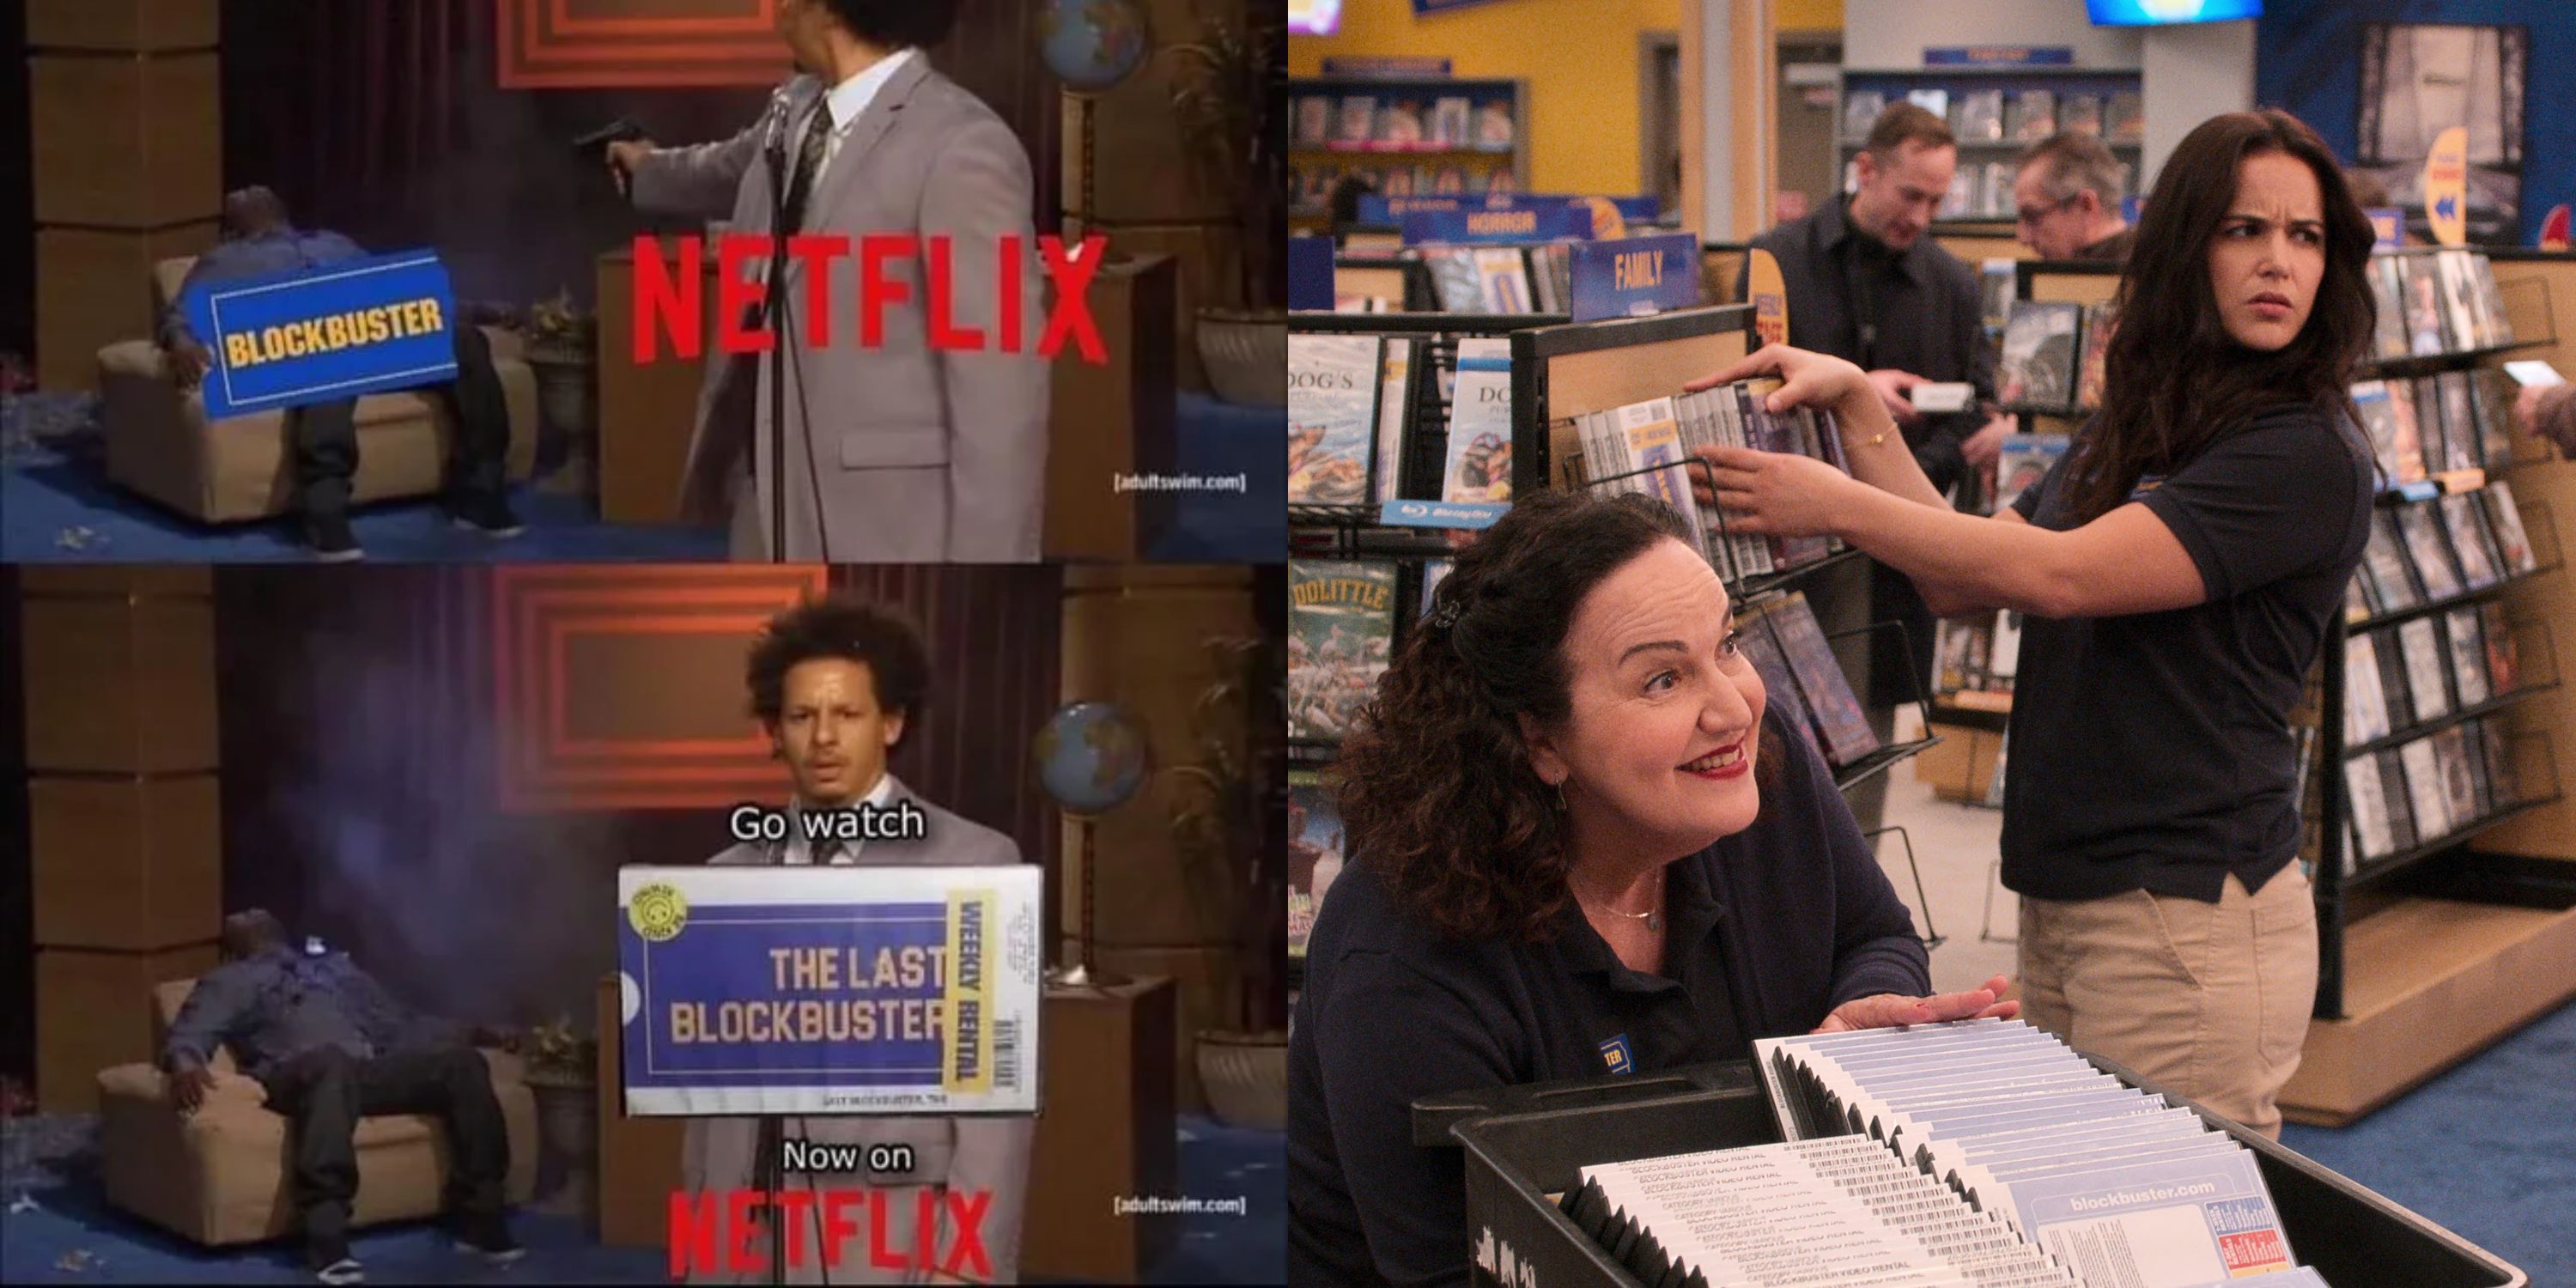 Featured image split a Blockbuster meme in the Eric Andre shooting Hannibal Buress format and a scene from Blockbuster